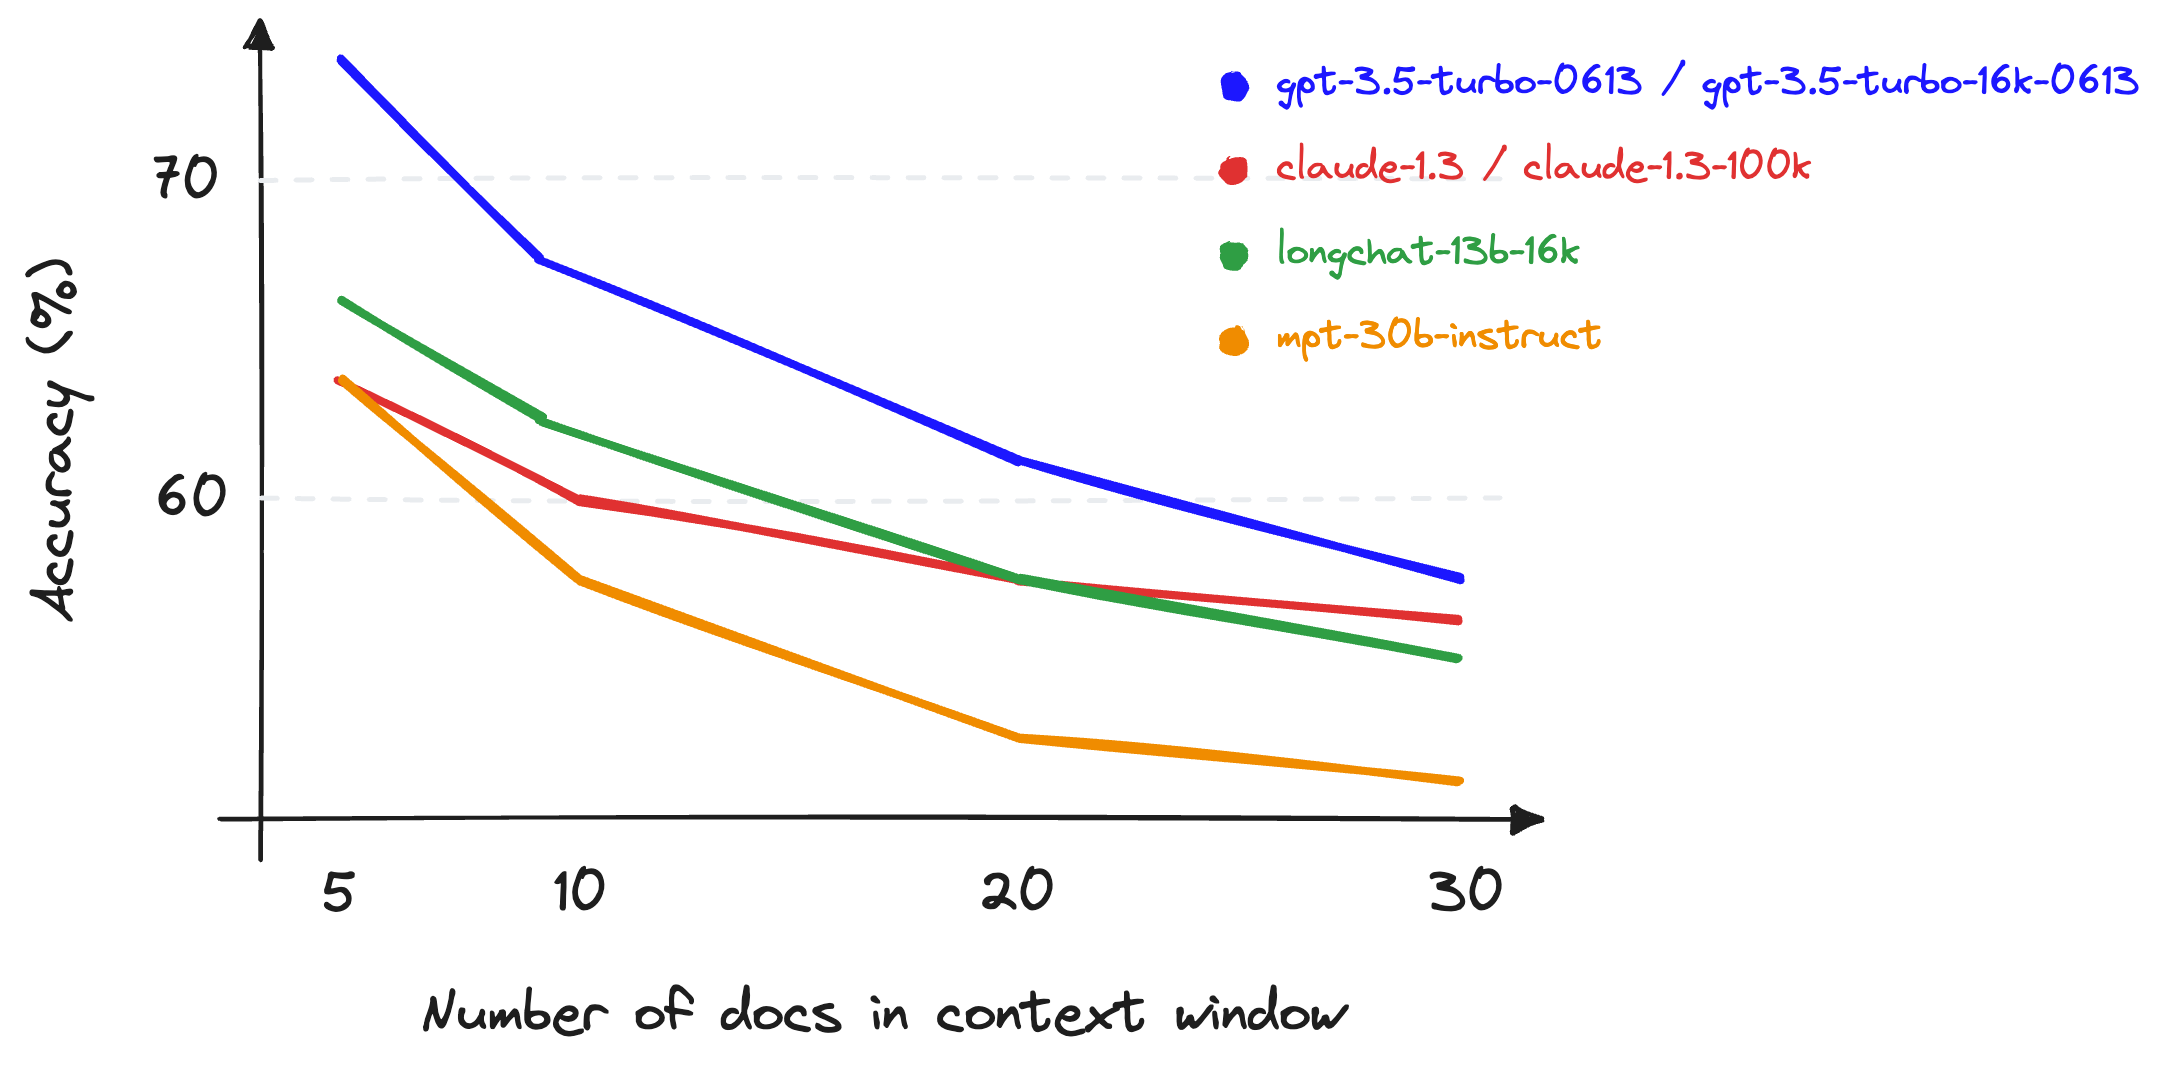 We can keep adding more to our context window, but it will degrade performance.